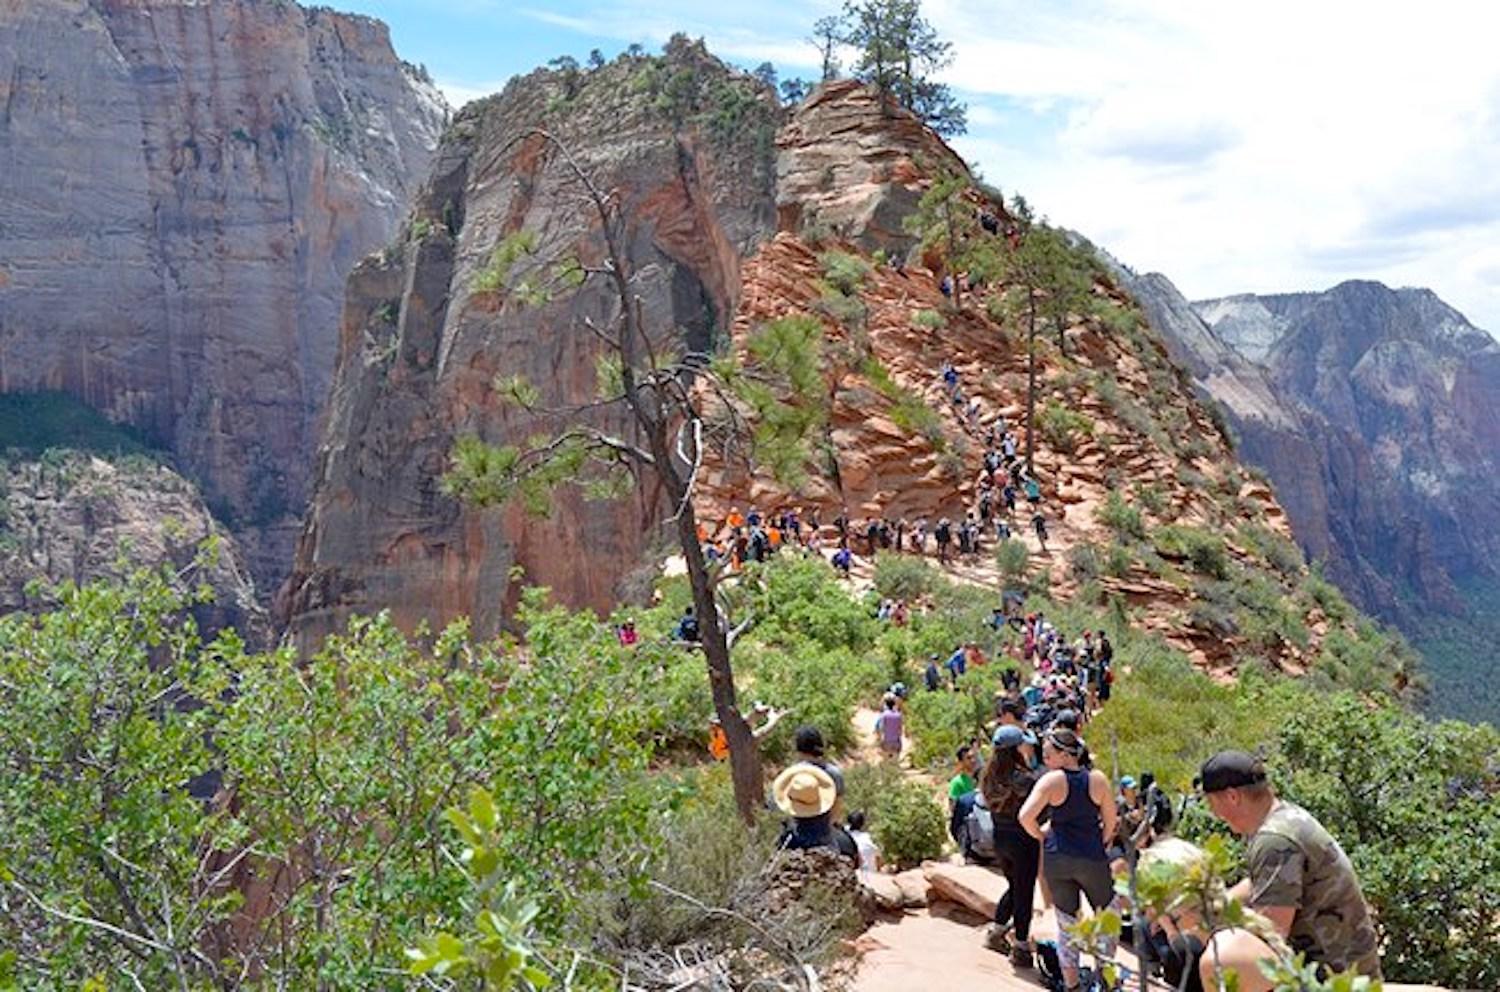 In 2017, Angels Landing at times saw 1,200 hikers per hour at times. Today you need a reservation/NPS file